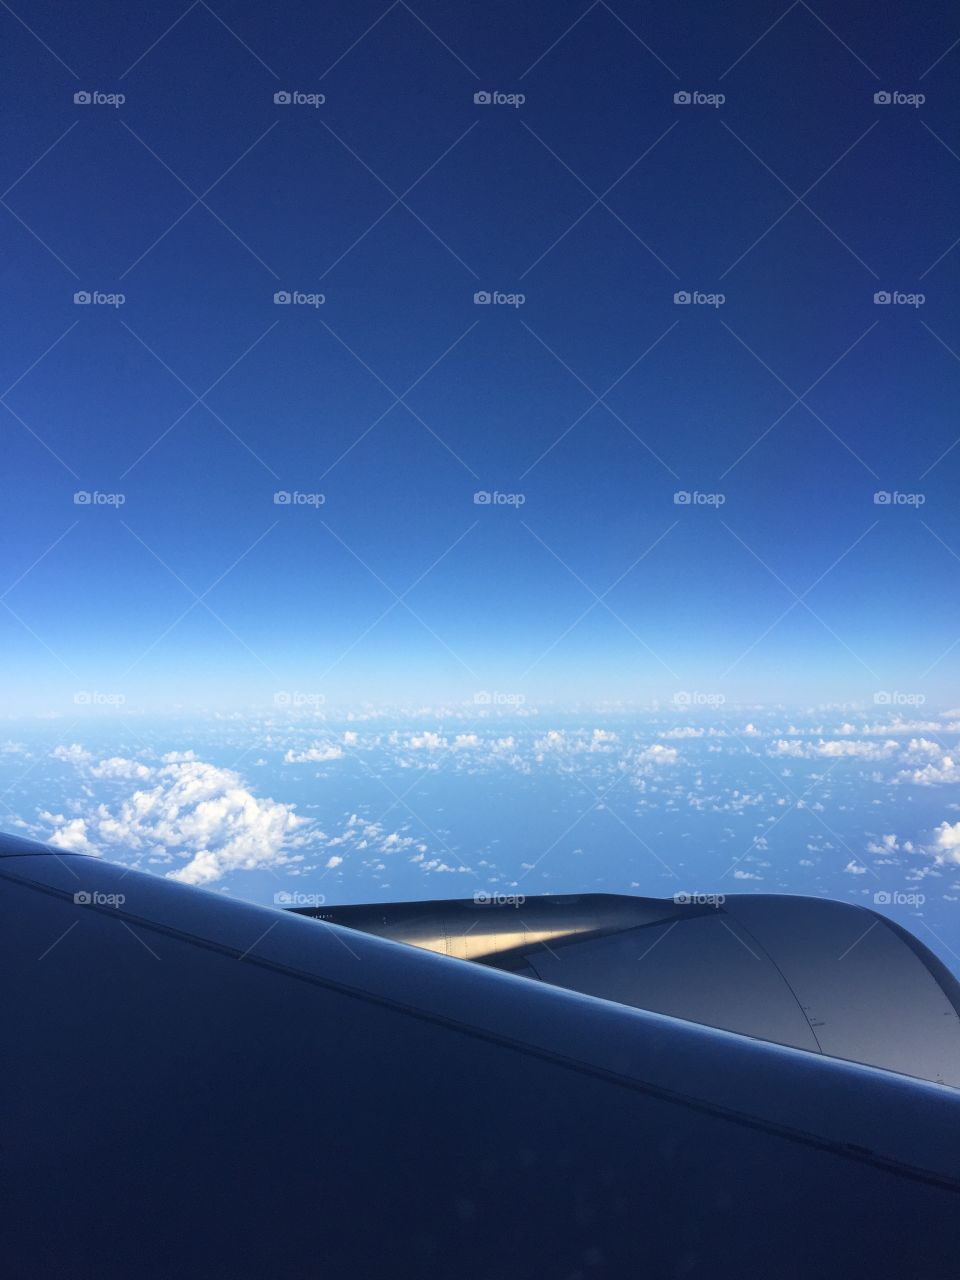 View of the Atlantic Ocean from a plane that shows the incredible blue of the sky and the shining clouds.